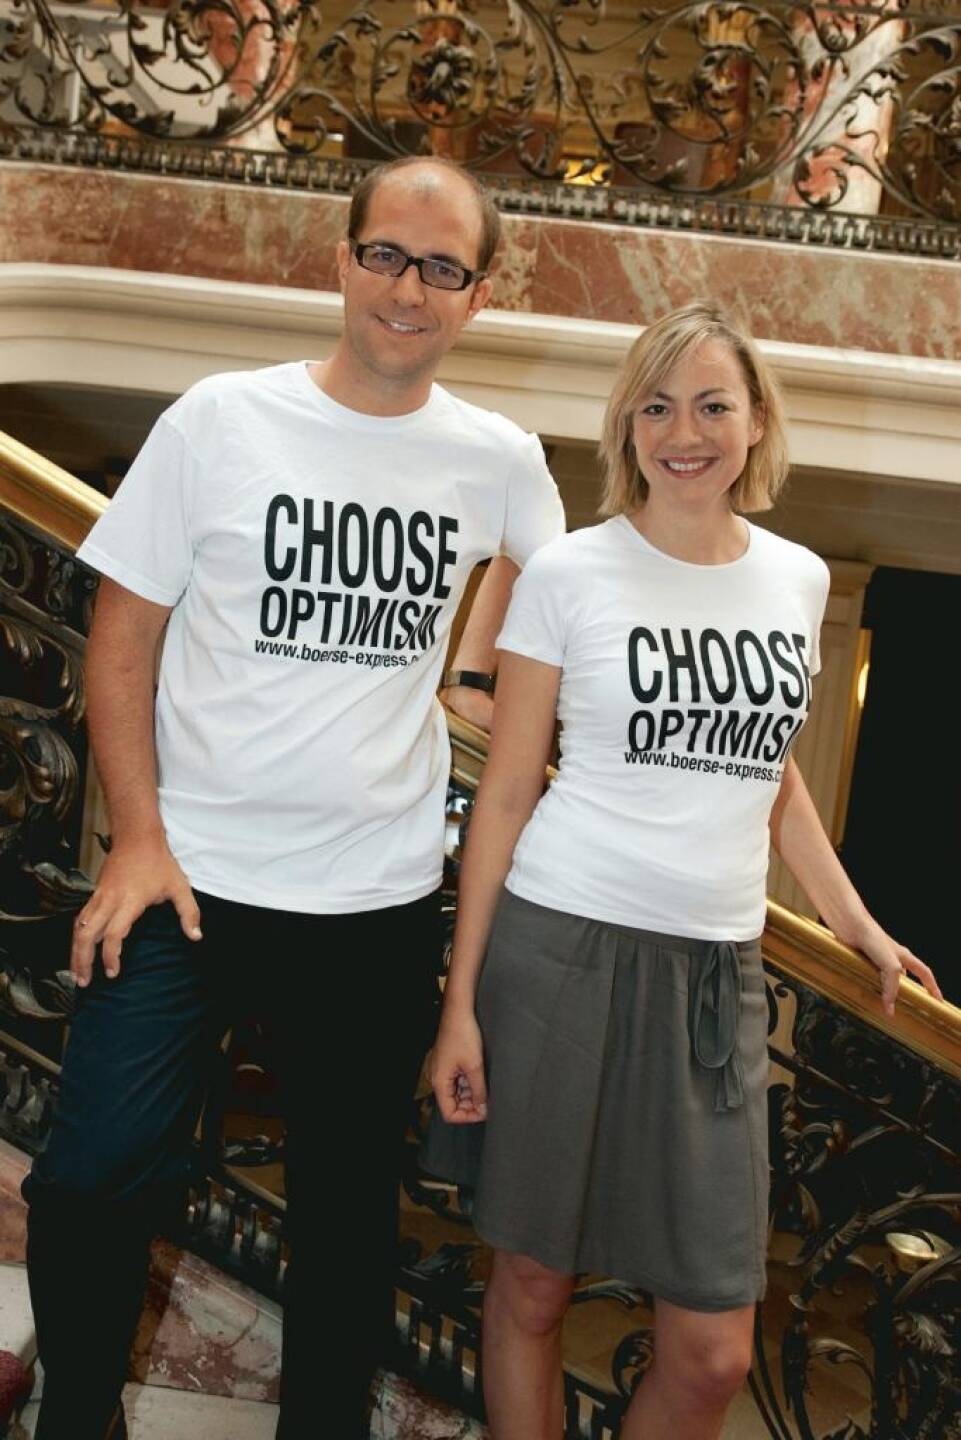 A Choose with a Smeil! Peter Schiefer, Ulrike Haidenthaller